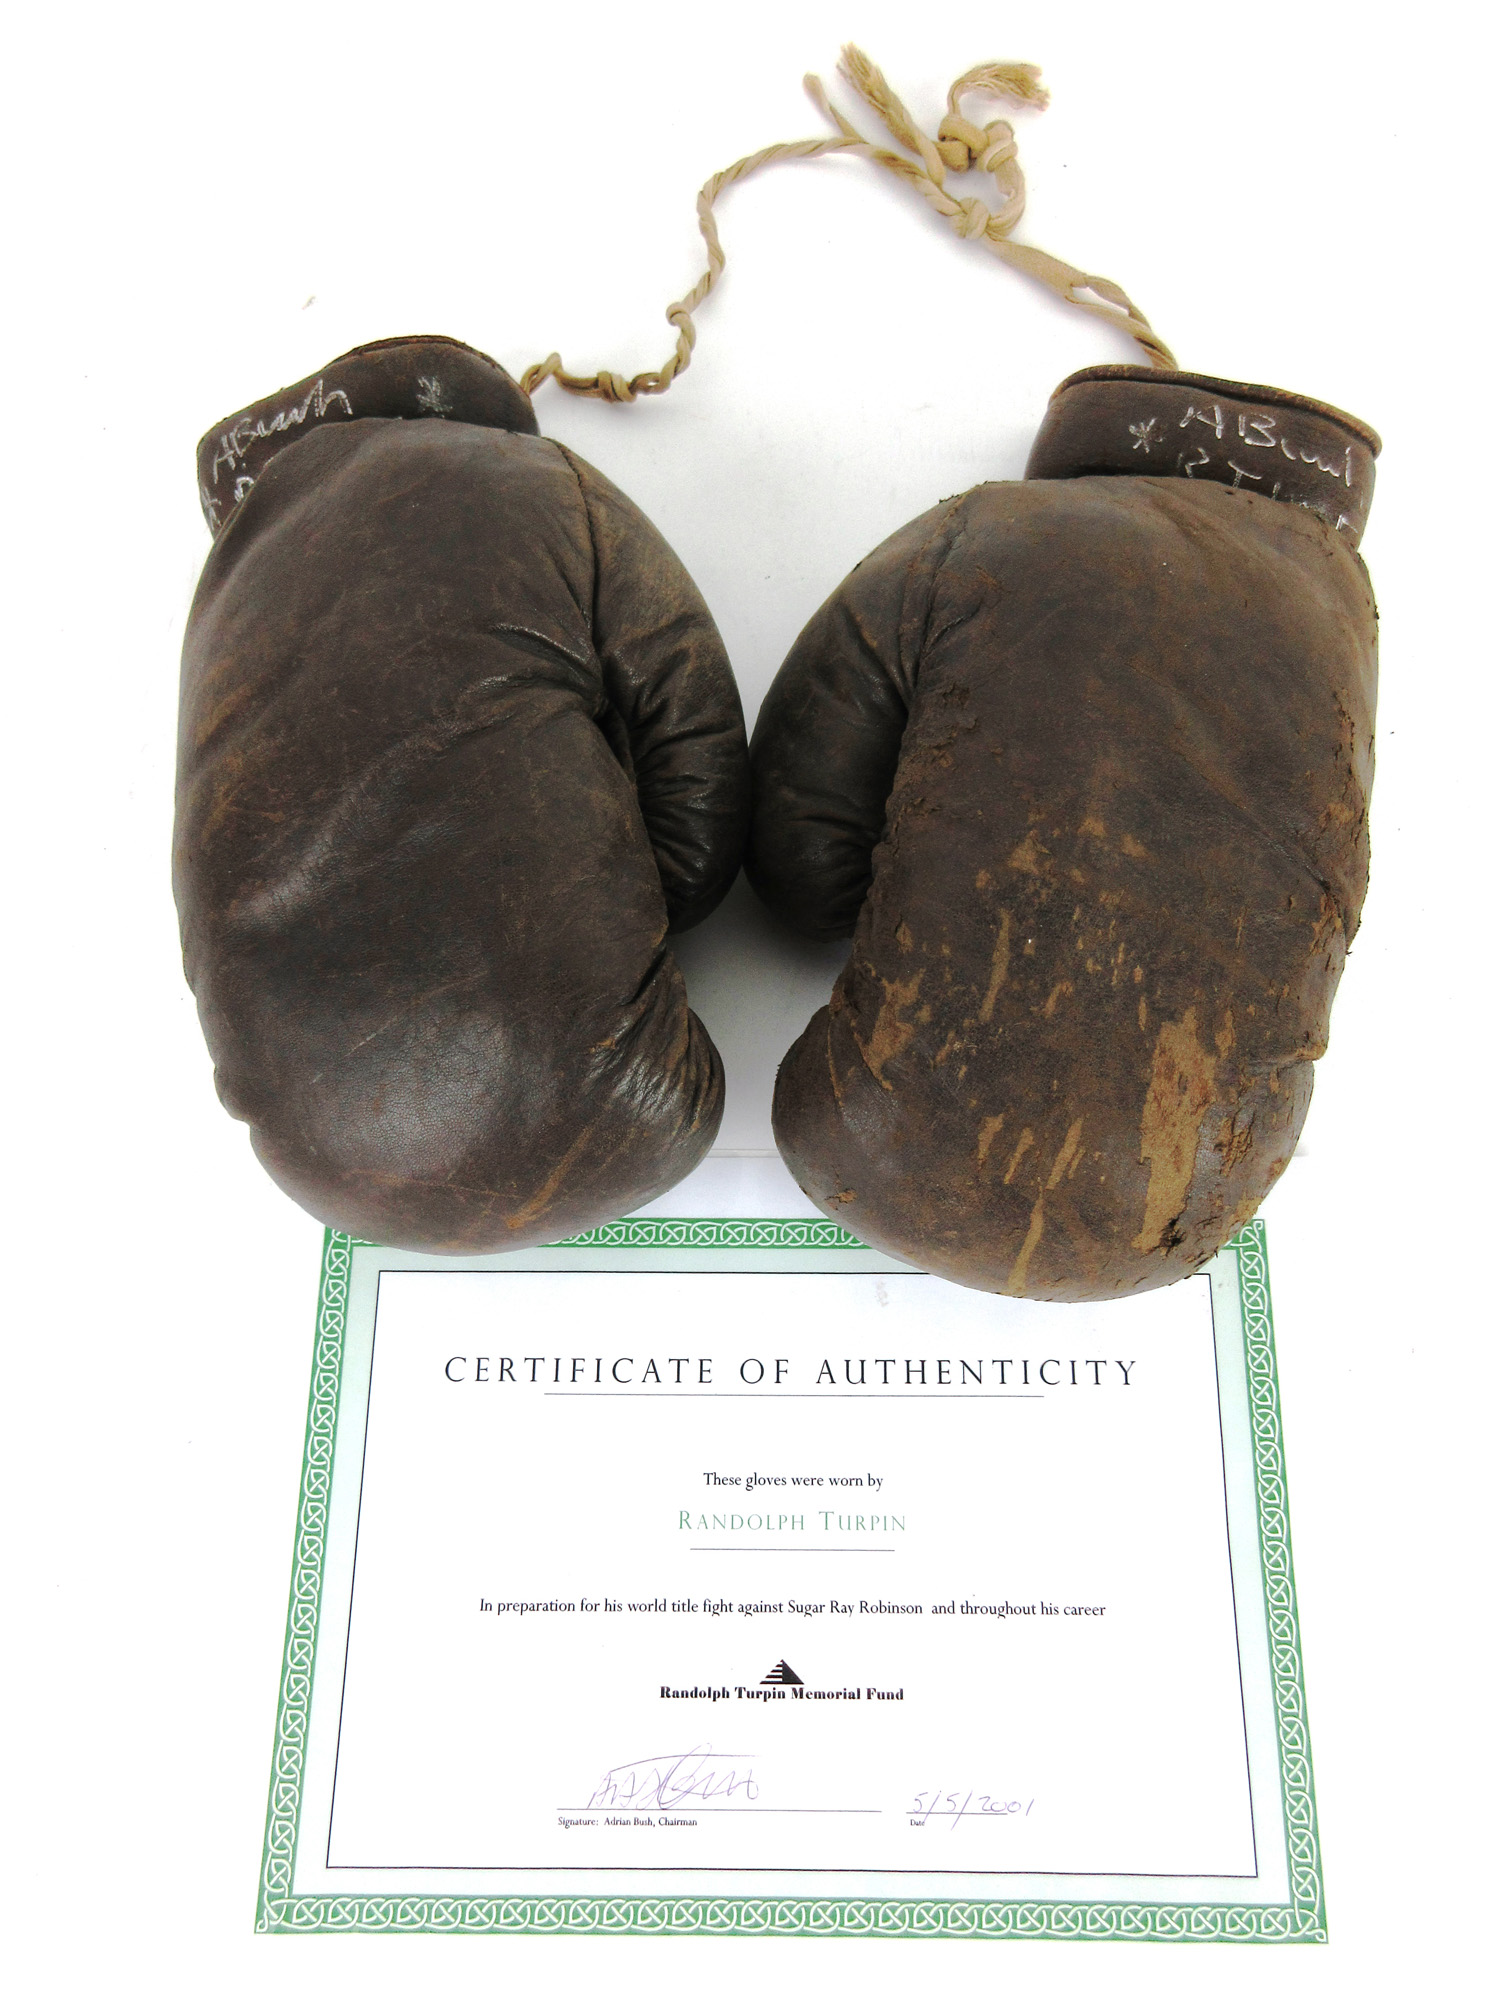 Boxing Interest: A pair of mid 20th century Spalding leather boxing gloves used by Randolph Turpin